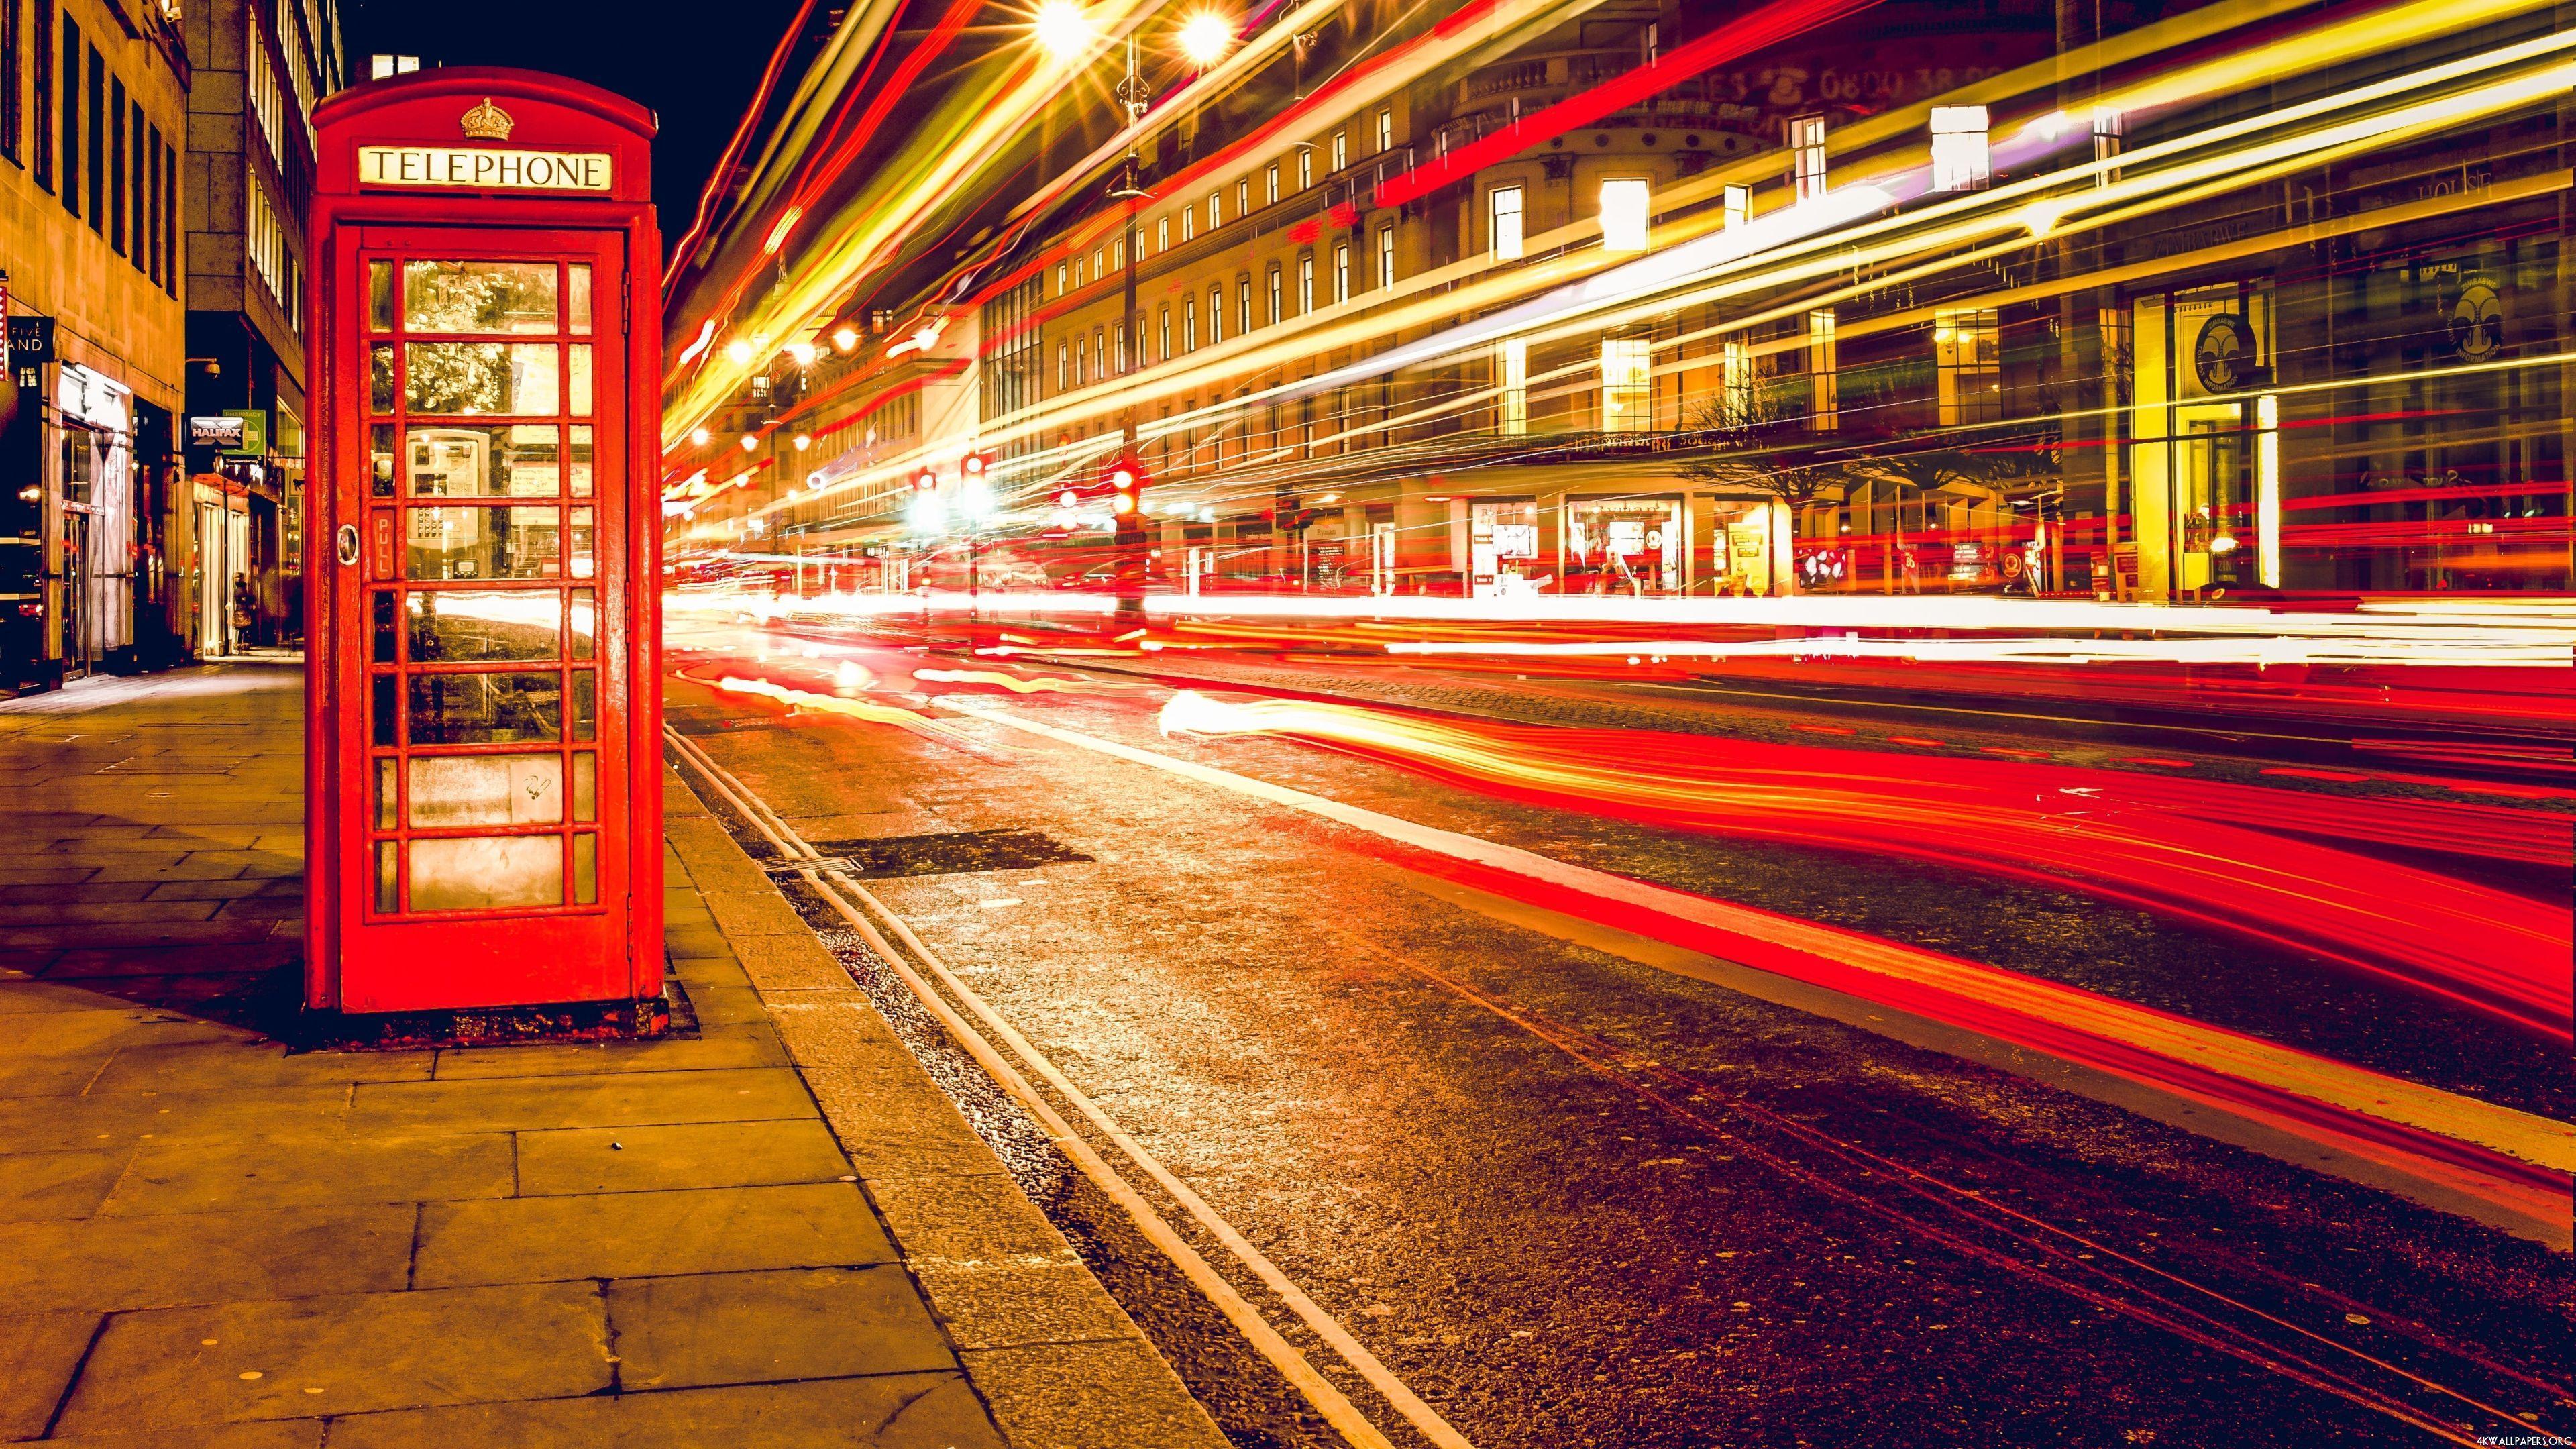 4K Red Telephone Booth Wallpaper